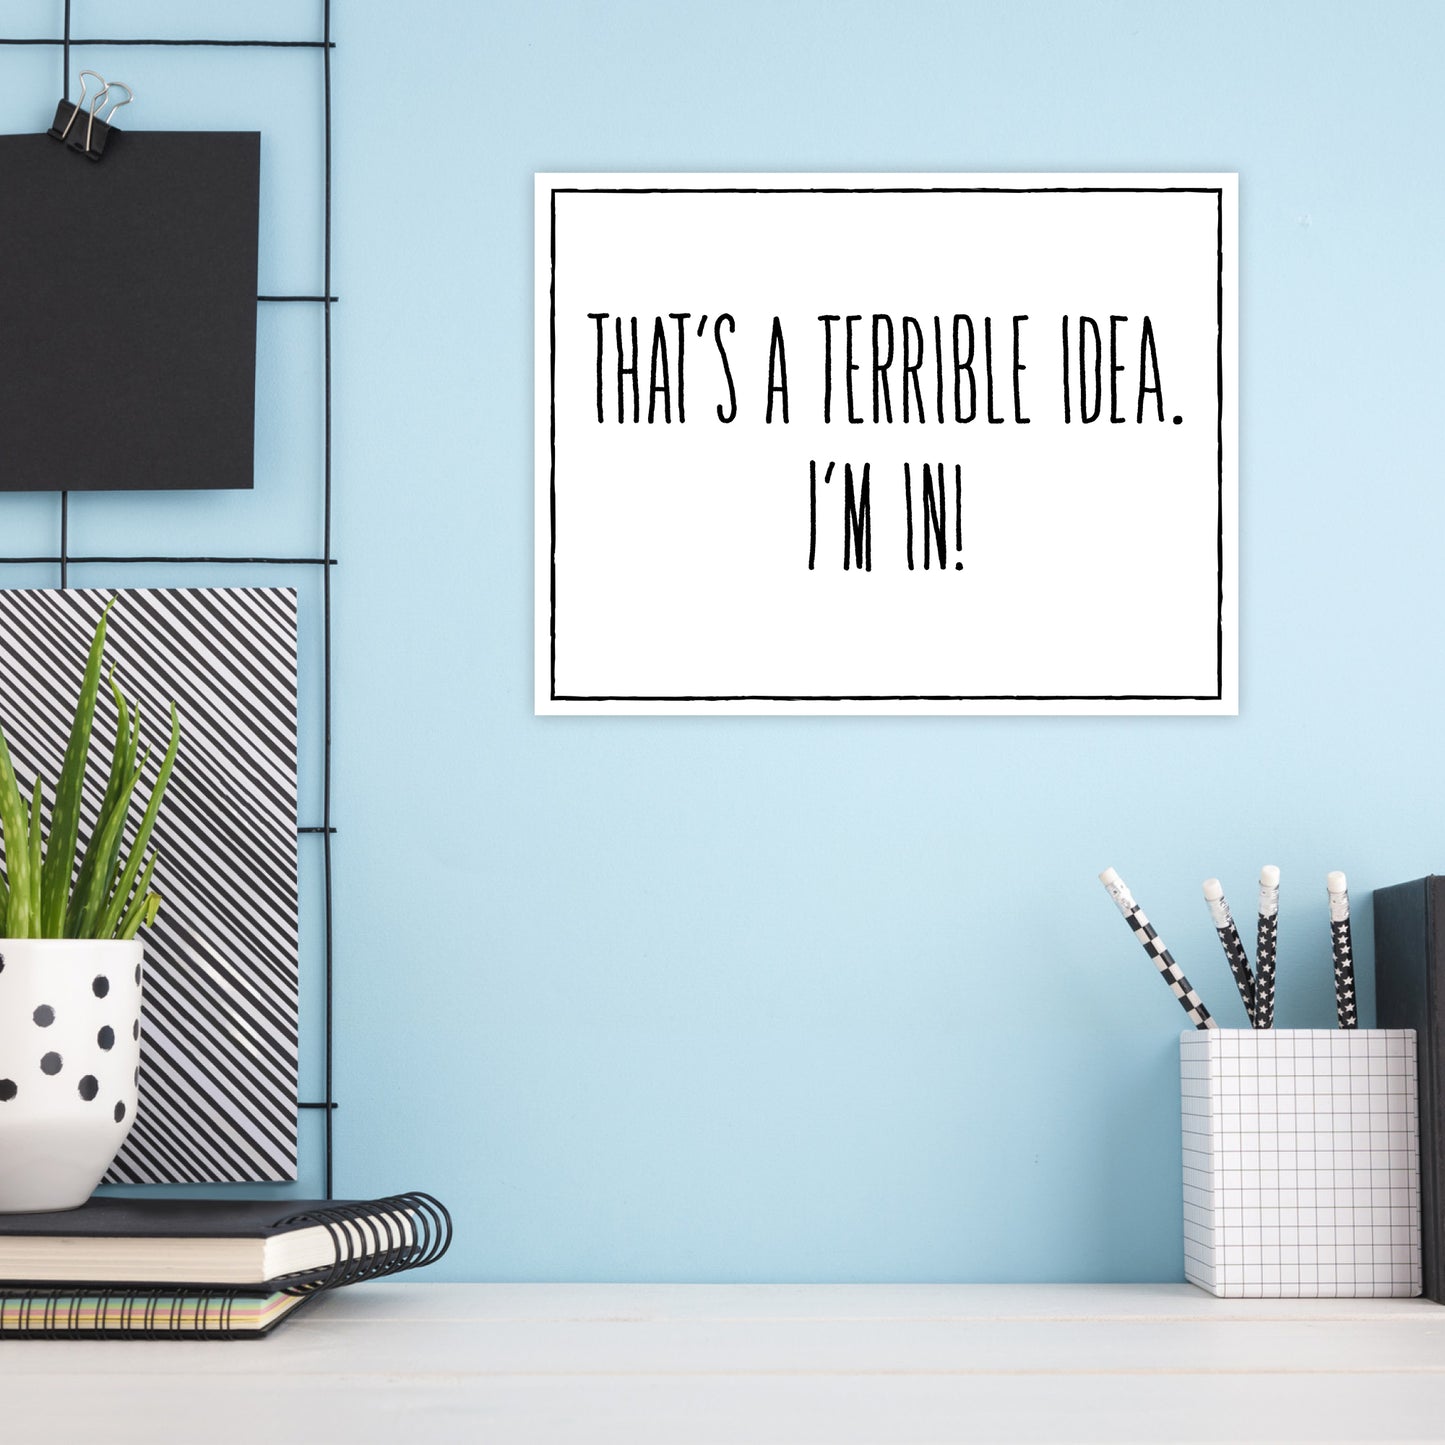 That's a Terrible Idea - I'm In! - 8.5" x 11" Funny Laminated Sign